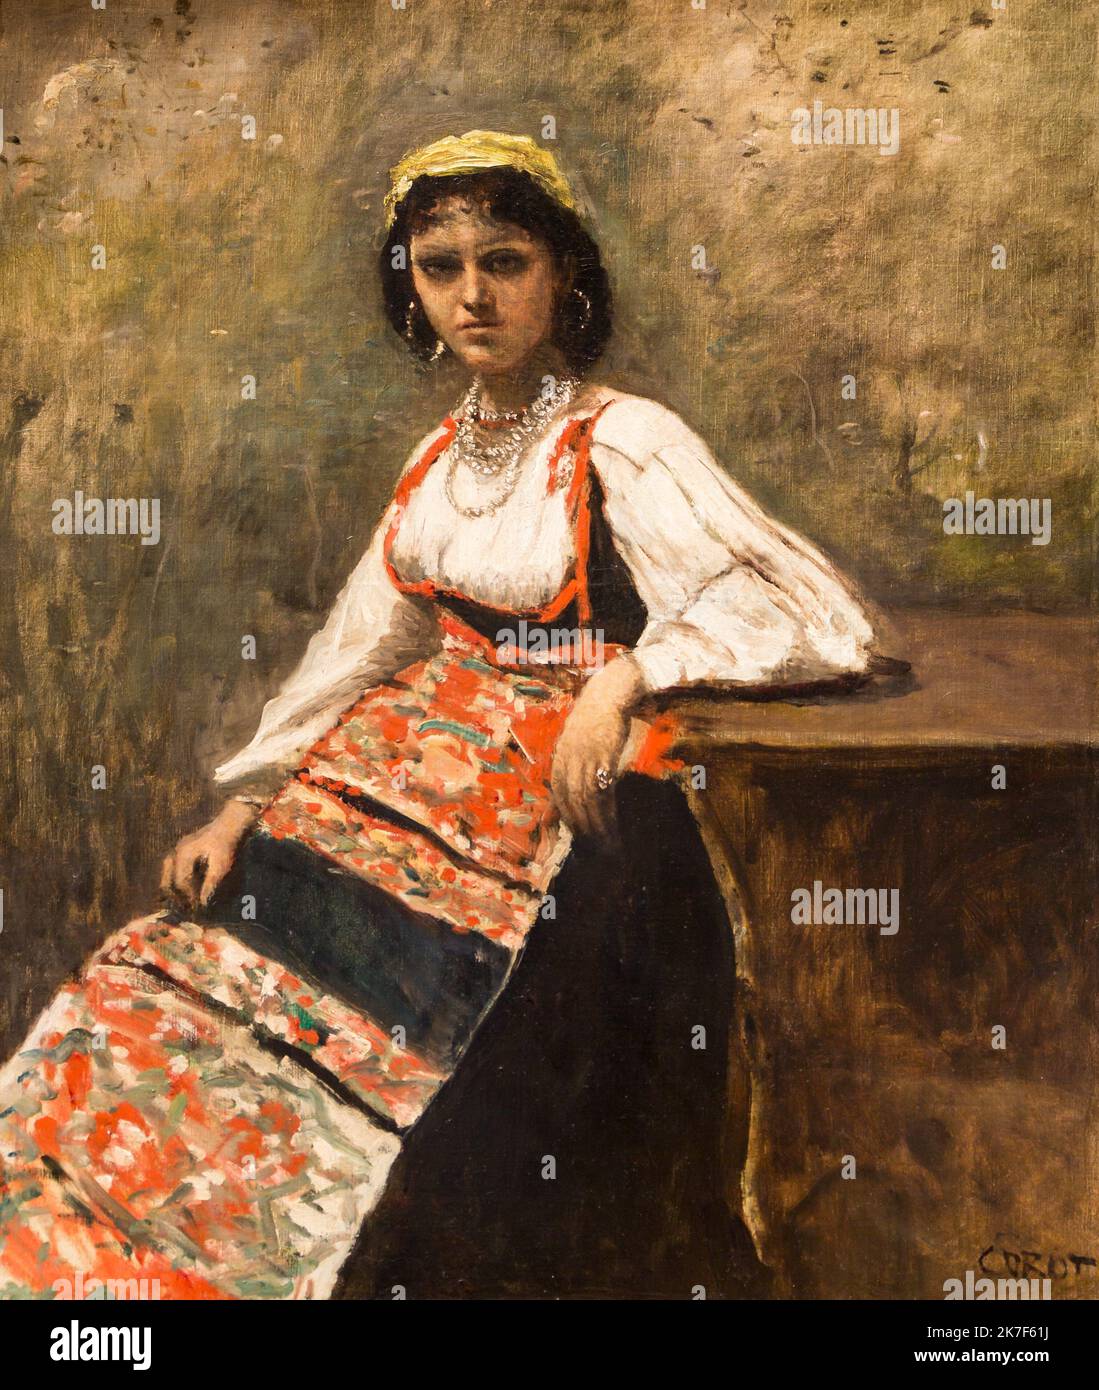 ©Active Museu/MAXPPP - ActiveMuseum 0001063.jpg / Fille Italienne, 1872 - Jean-Baptiste-Camille Corot 1872 - / Jean-Baptiste Camille Corot / Peinture Active Museum / Le Pictorium Dress ,Earring ,Eyes ,Girl ,Italian ,Italian Girl ,Jewel ,Necklace ,Realism ,Romanticism ,Vertical ,Woman ,Europe ,Italy ,Western Europe ,19th century ,Jean-Baptiste-Camille Corot ,Painting ,  Stock Photo